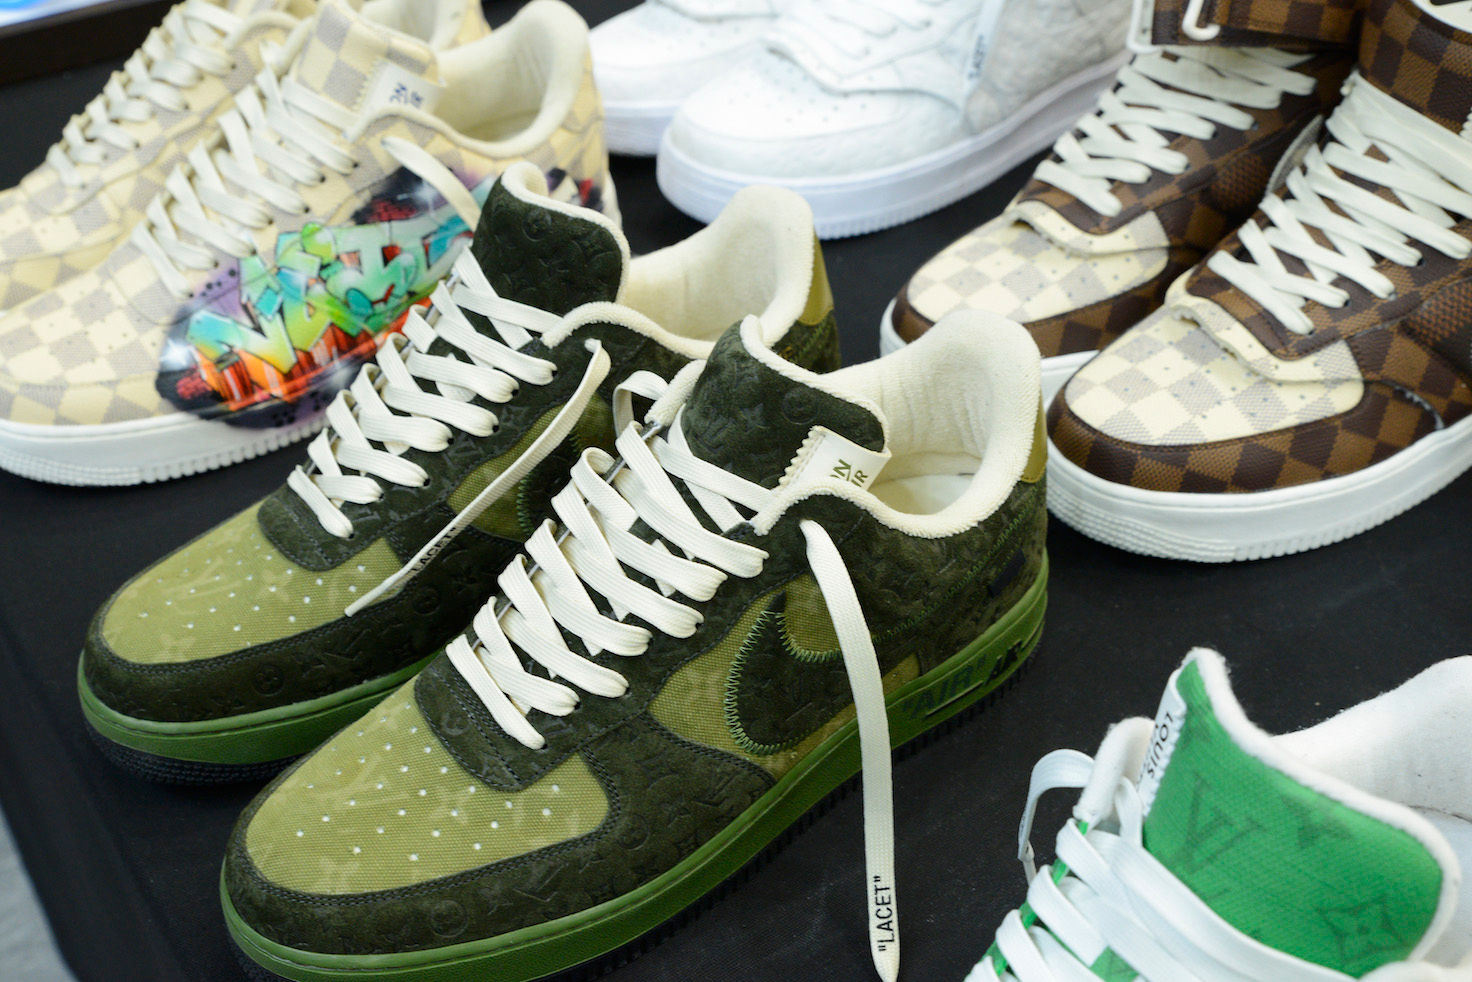 How to buy Louis Vuitton x Nike Air Force 1 sneakers in Singapore